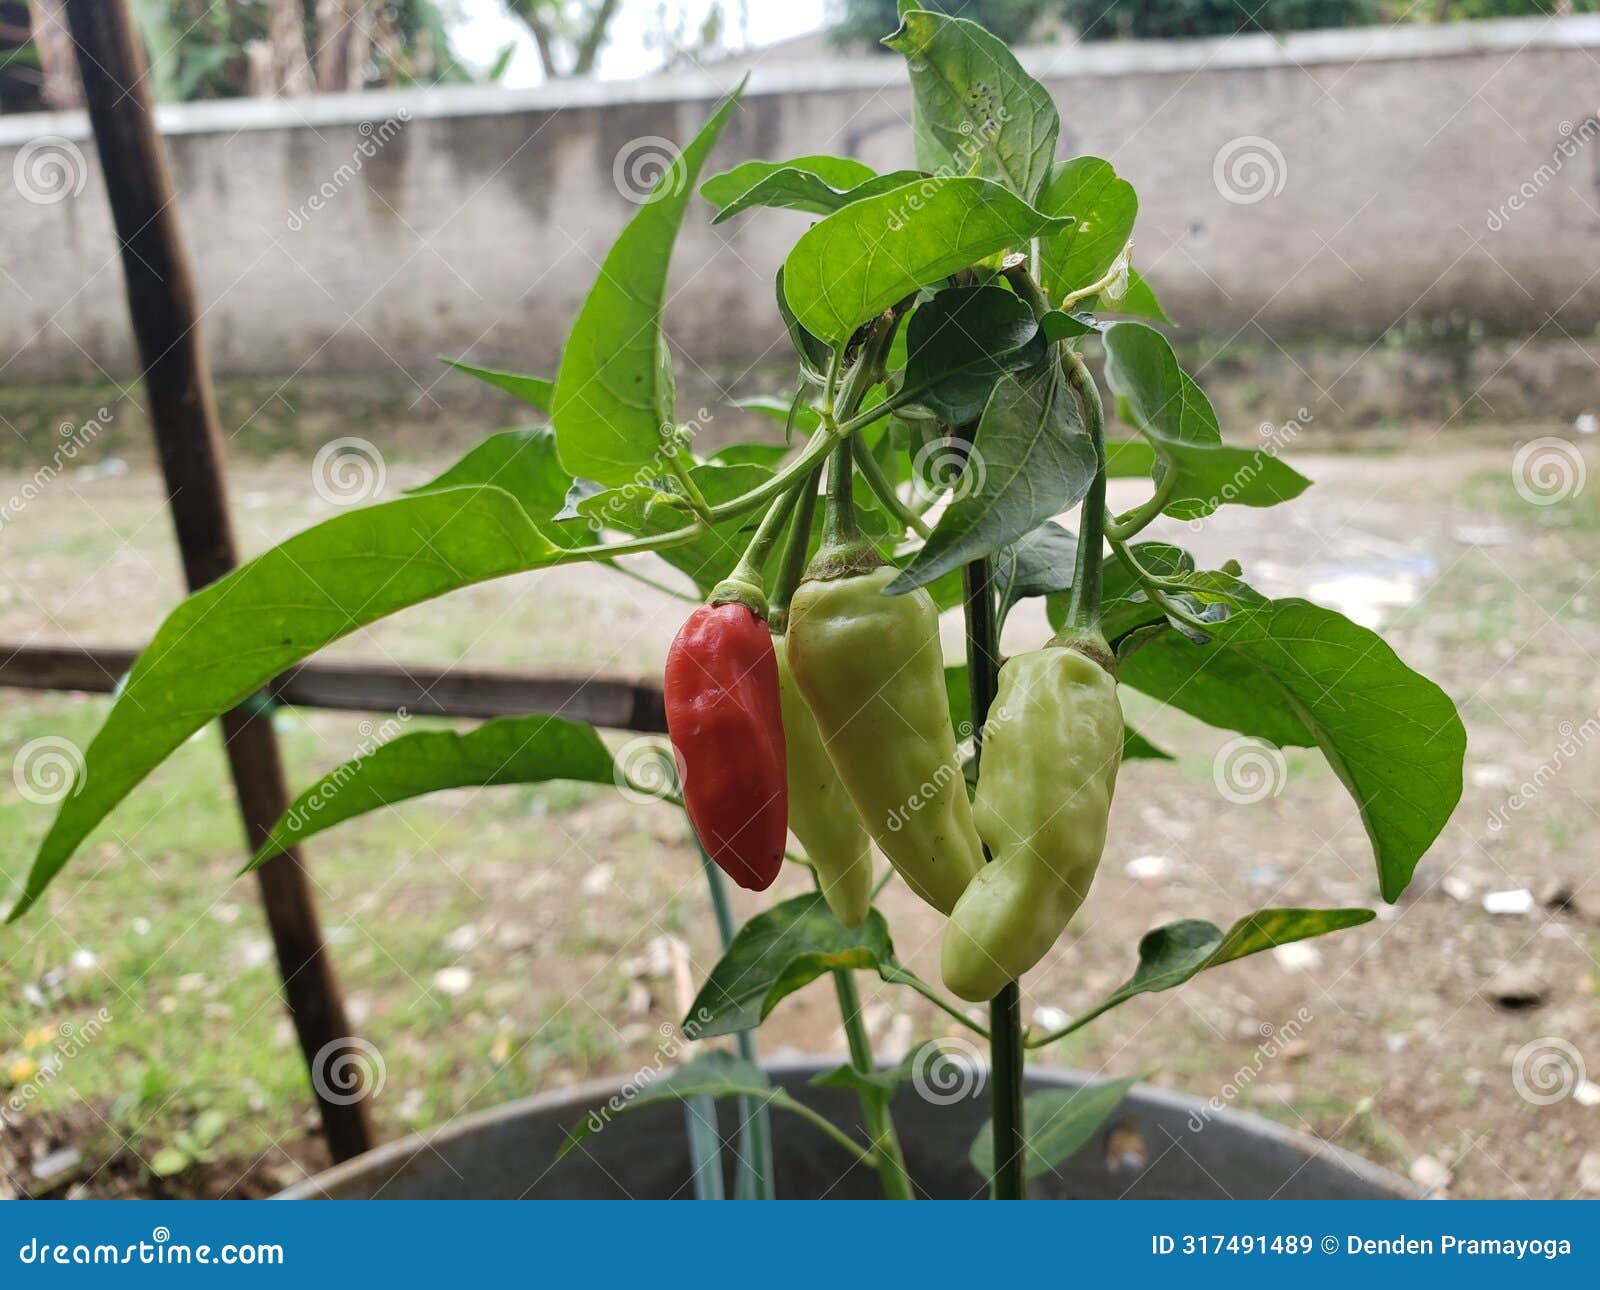 one of the cayenne peppers is already ripe even though there are only four of them